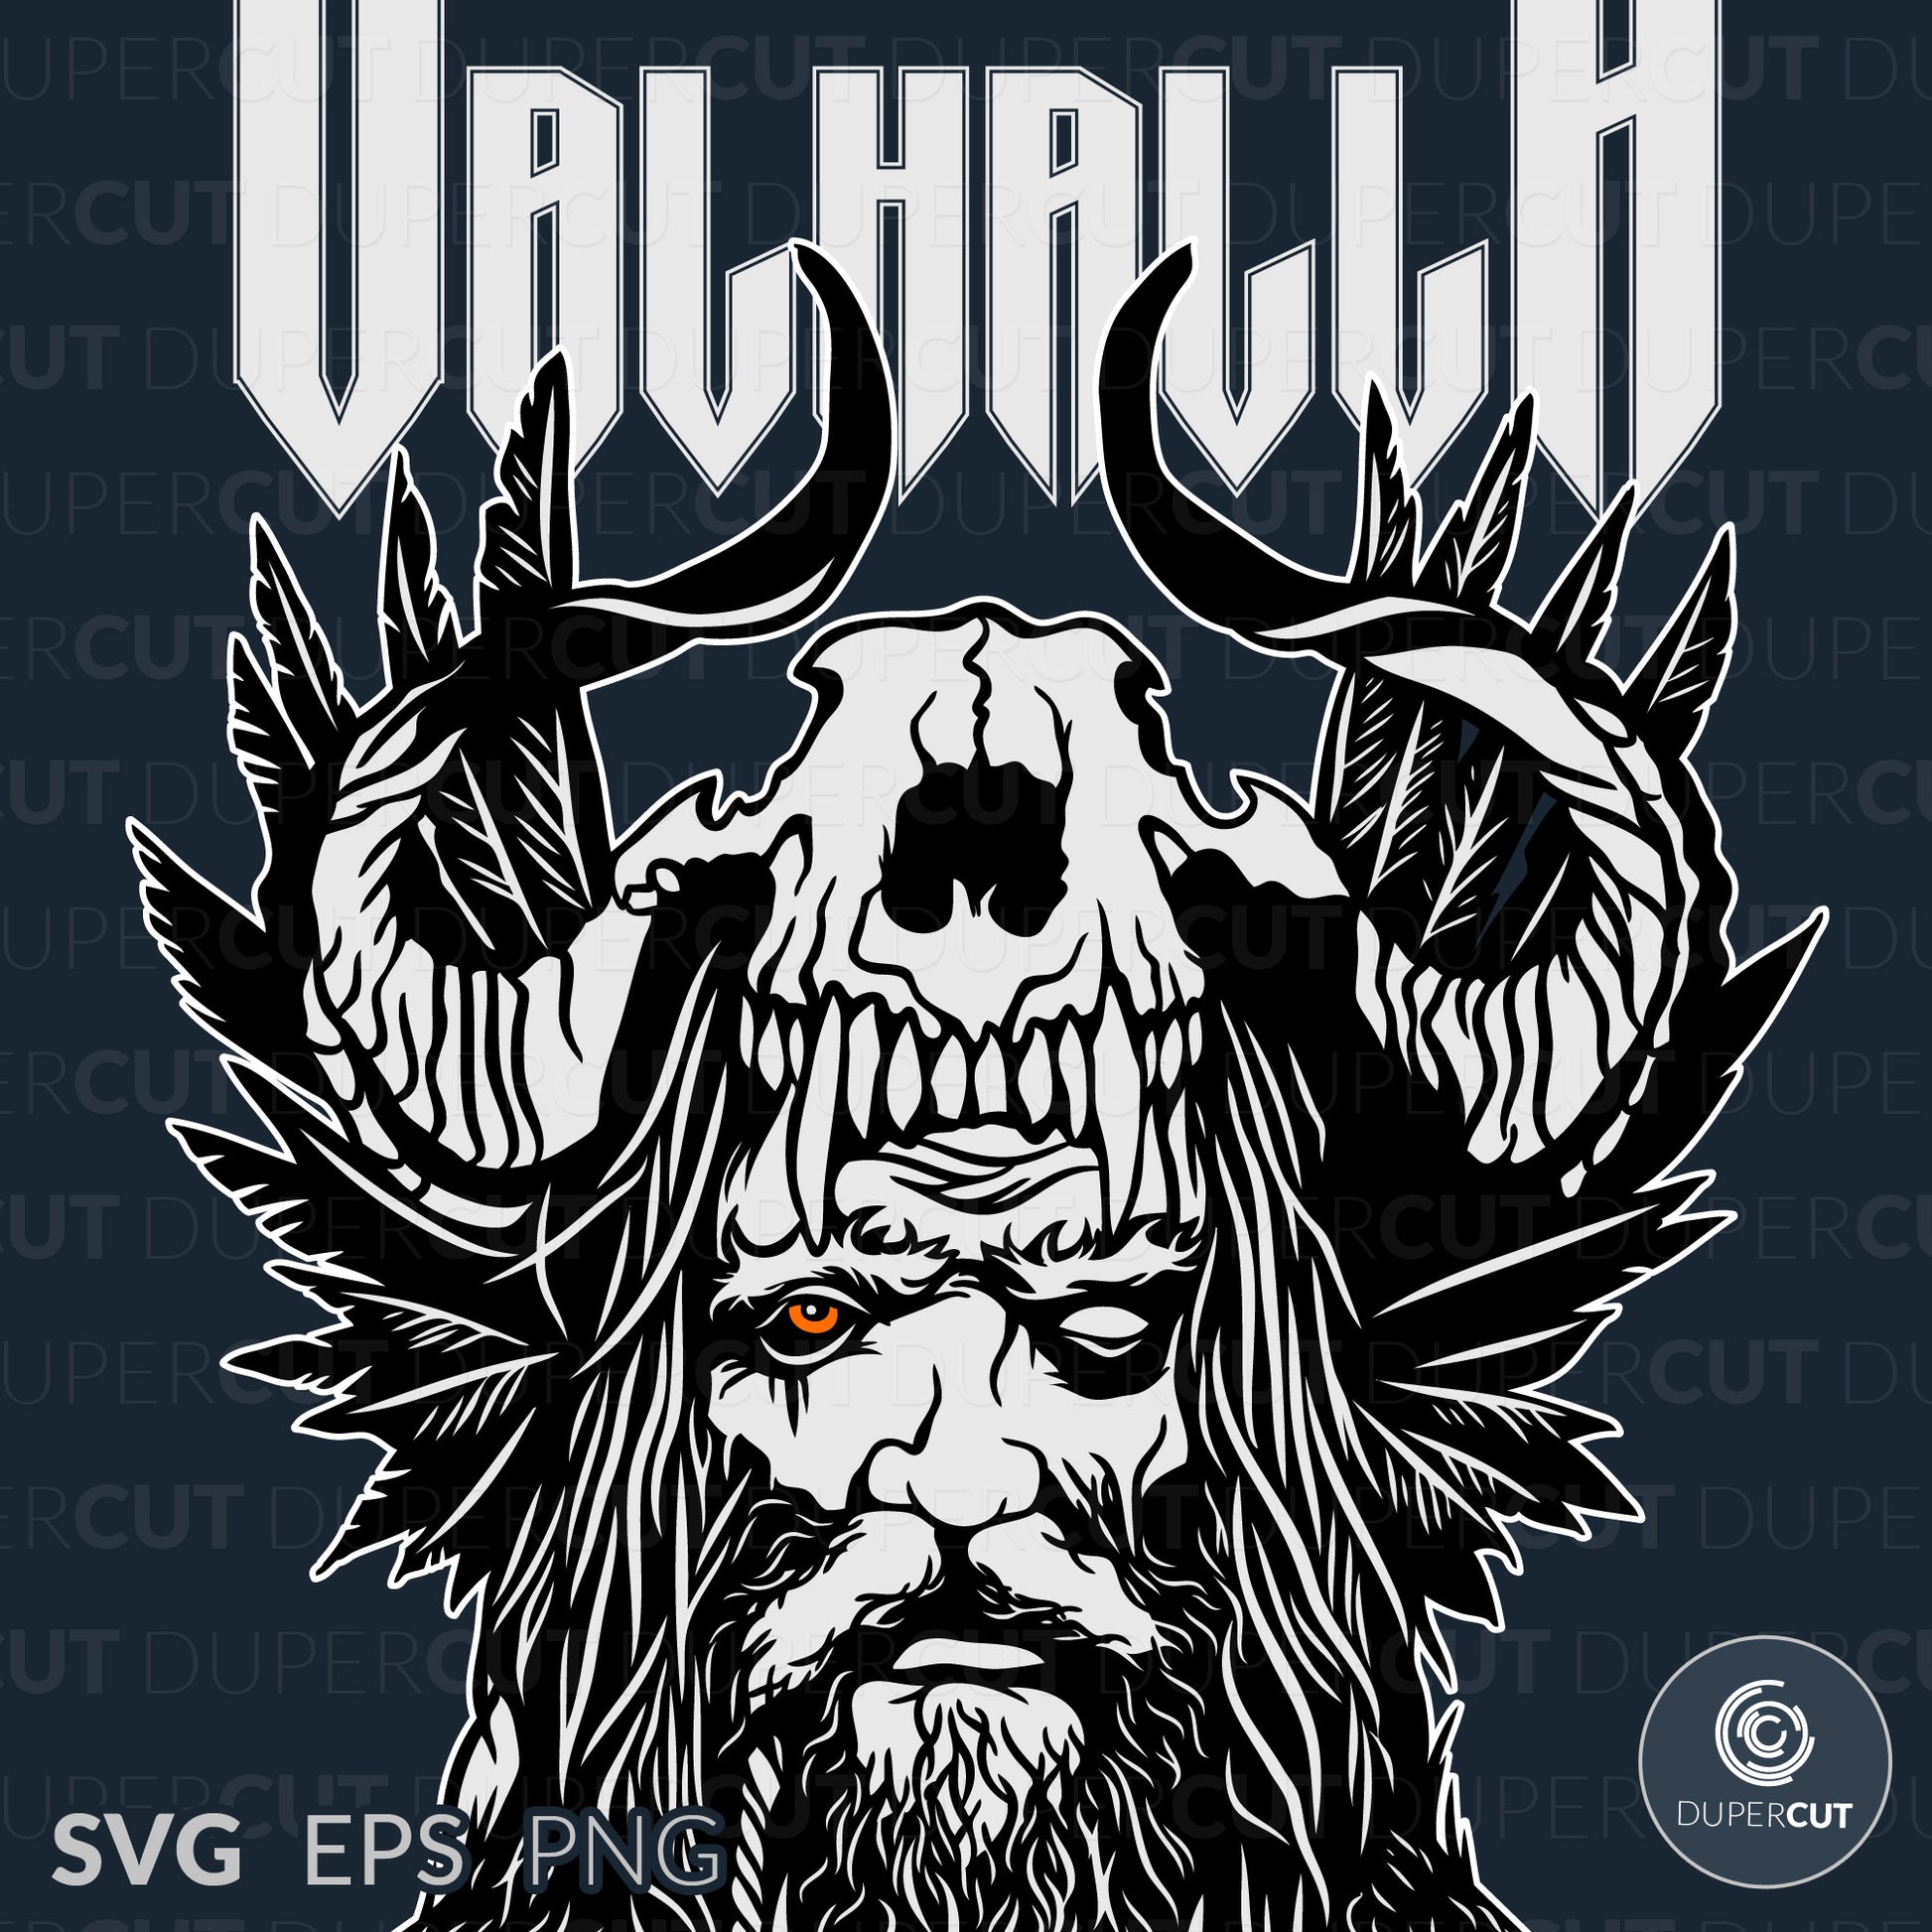 Valhalla Viking Nordic design - EPS, SVG, PNG files. Vector Colour illustration for print on demand, sublimation, custom t-shirts, hoodies, tumblers.